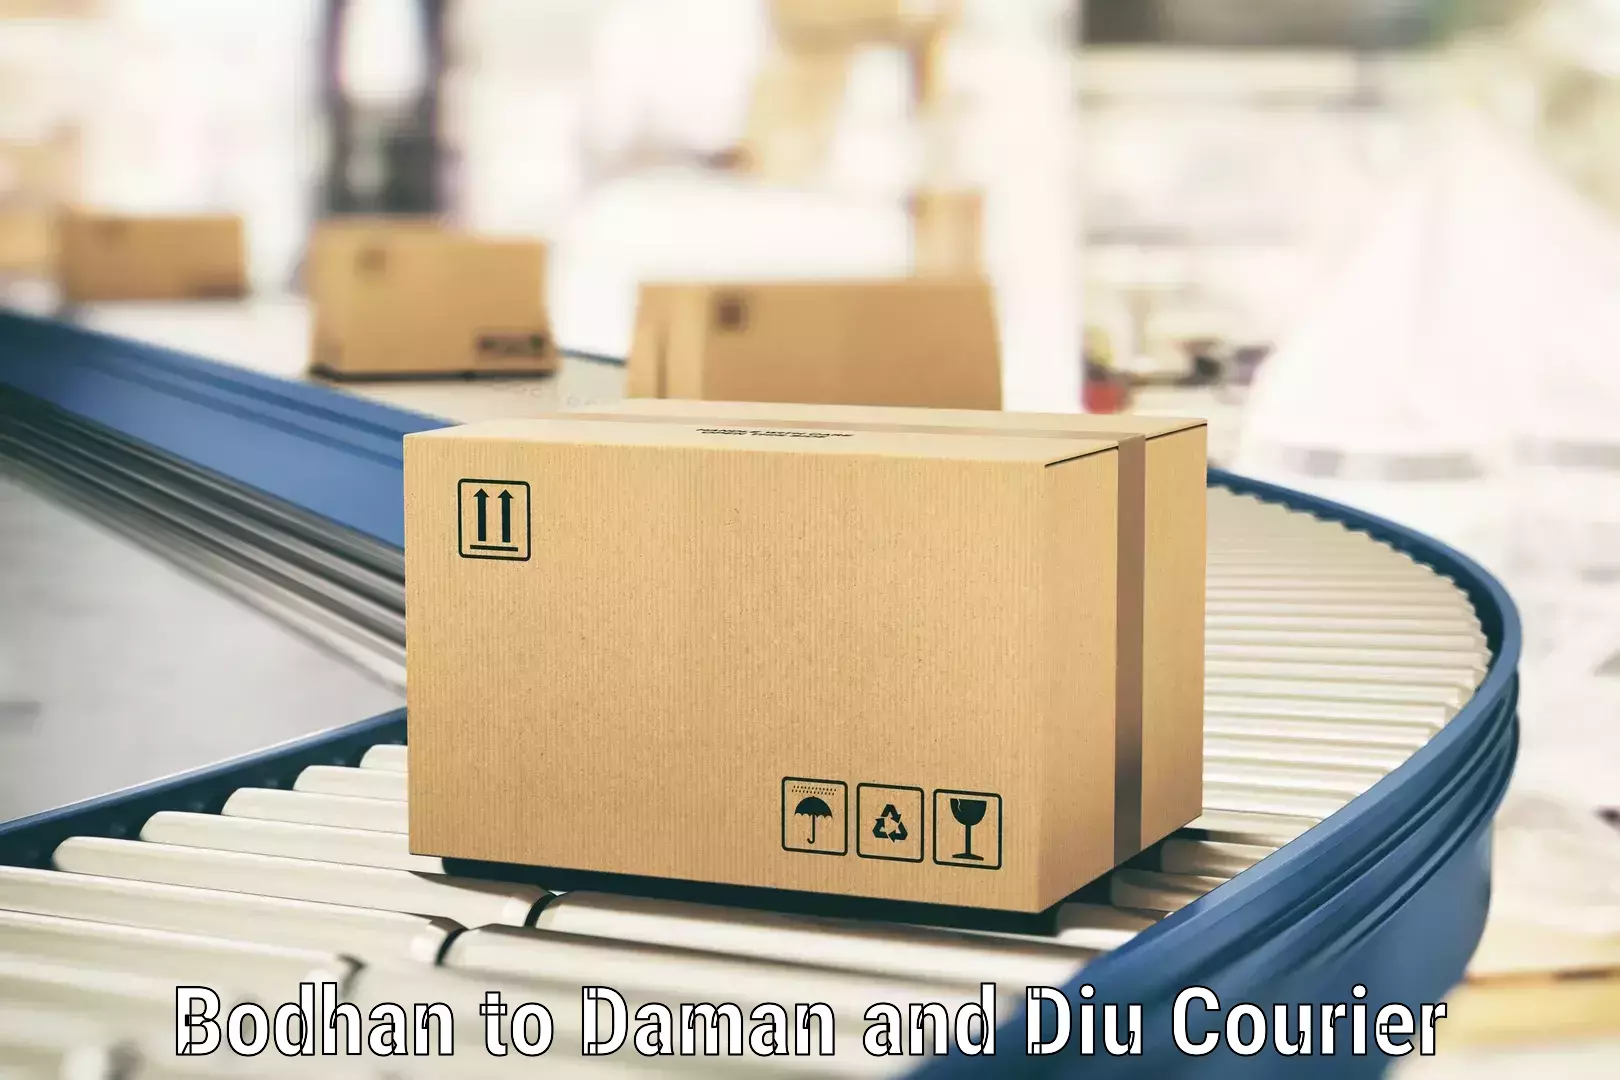 International courier networks Bodhan to Daman and Diu